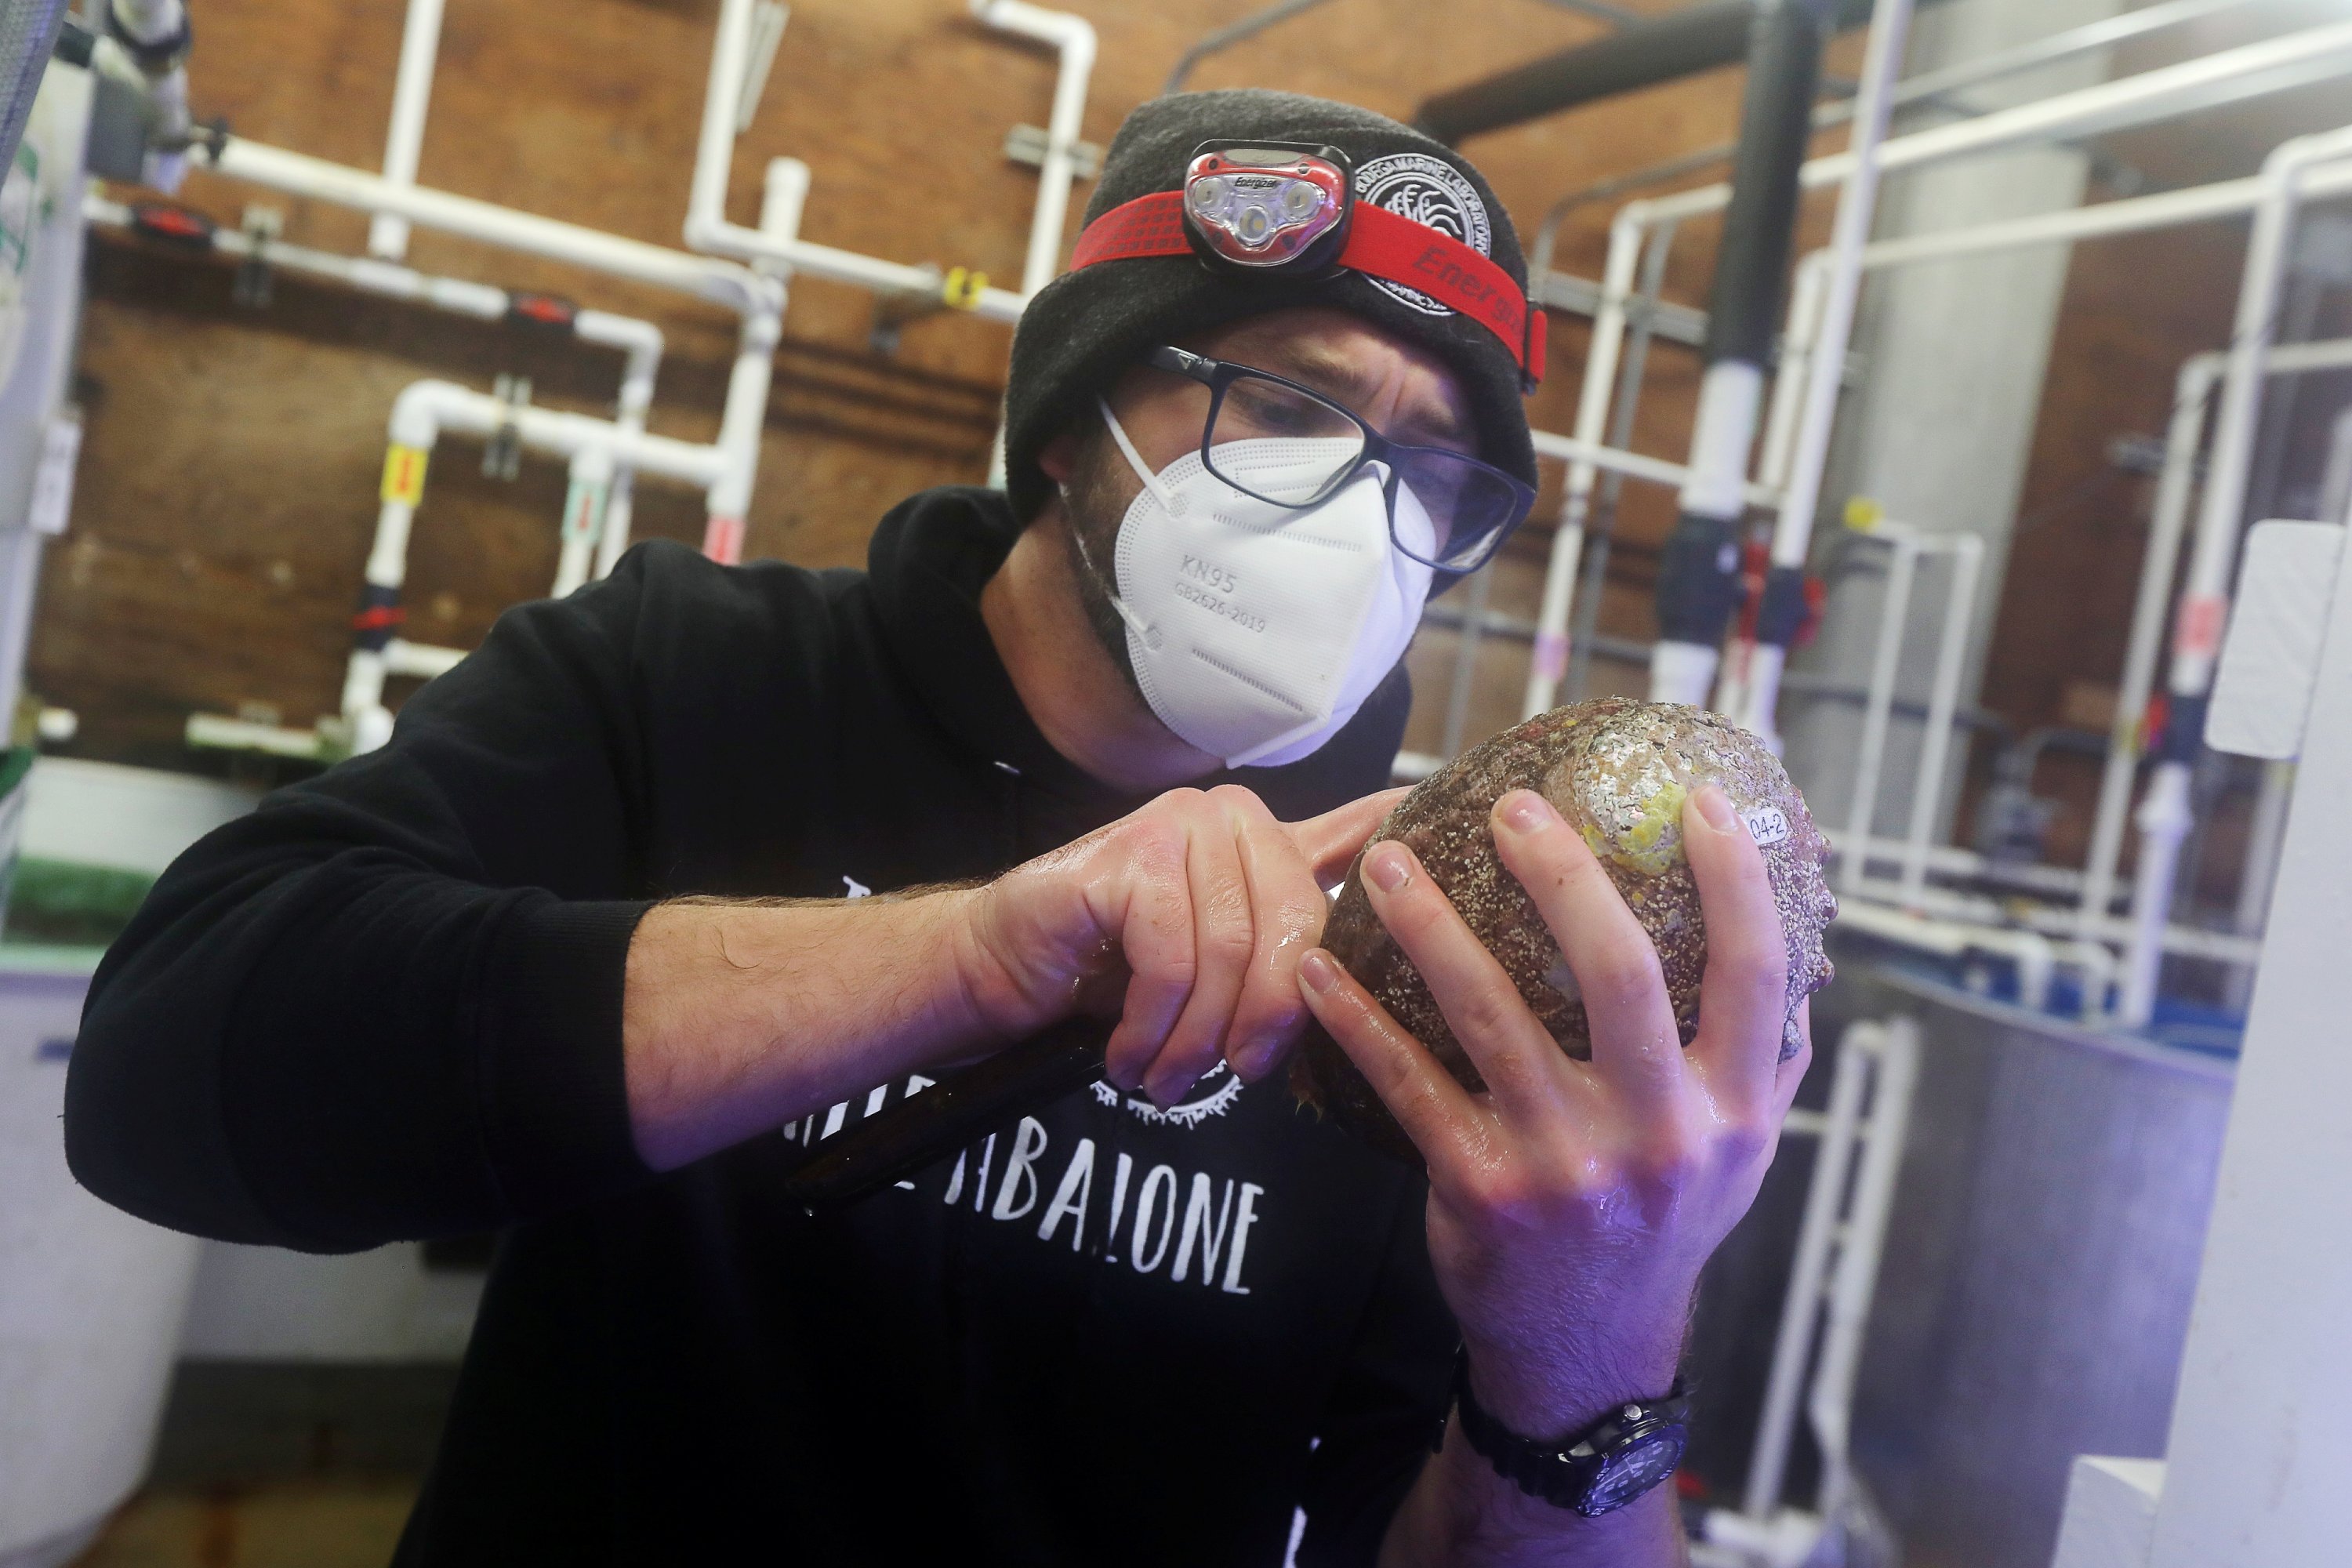 Lab technician Evan Tjeerdema measures a white abalone at the University of California